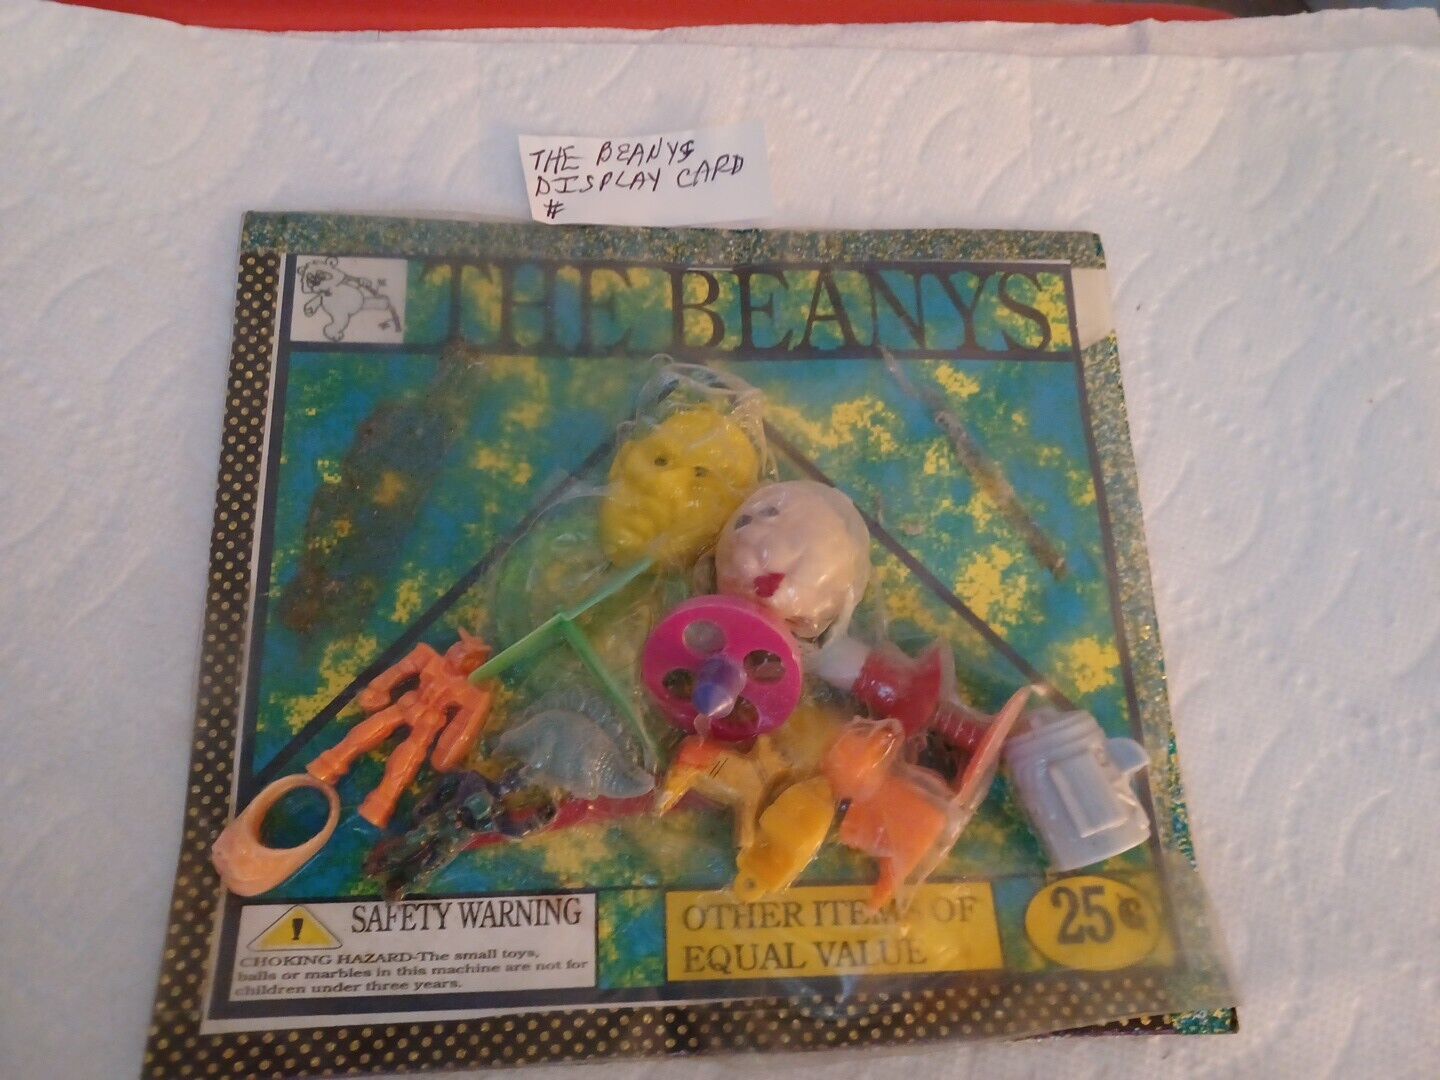 VINTAGE RARE GUMBALL/VENDING THE BEANYS DISPLAY CARD